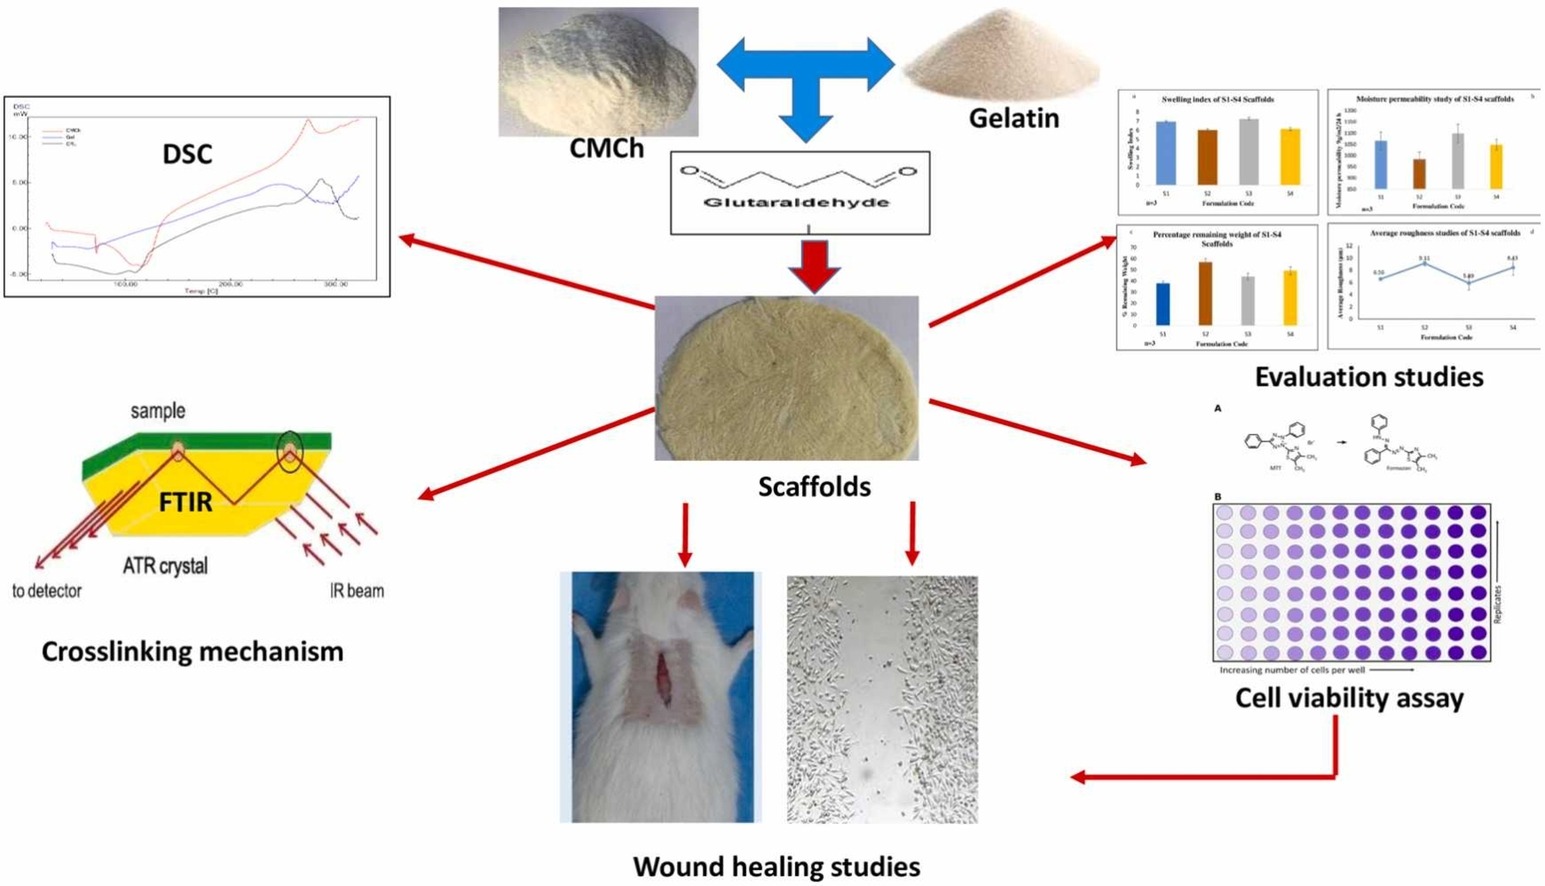 Physicochemical and in vivo evaluation of crosslinked carboxymethyl chitosan-gelatin scaffolds for wound healing application